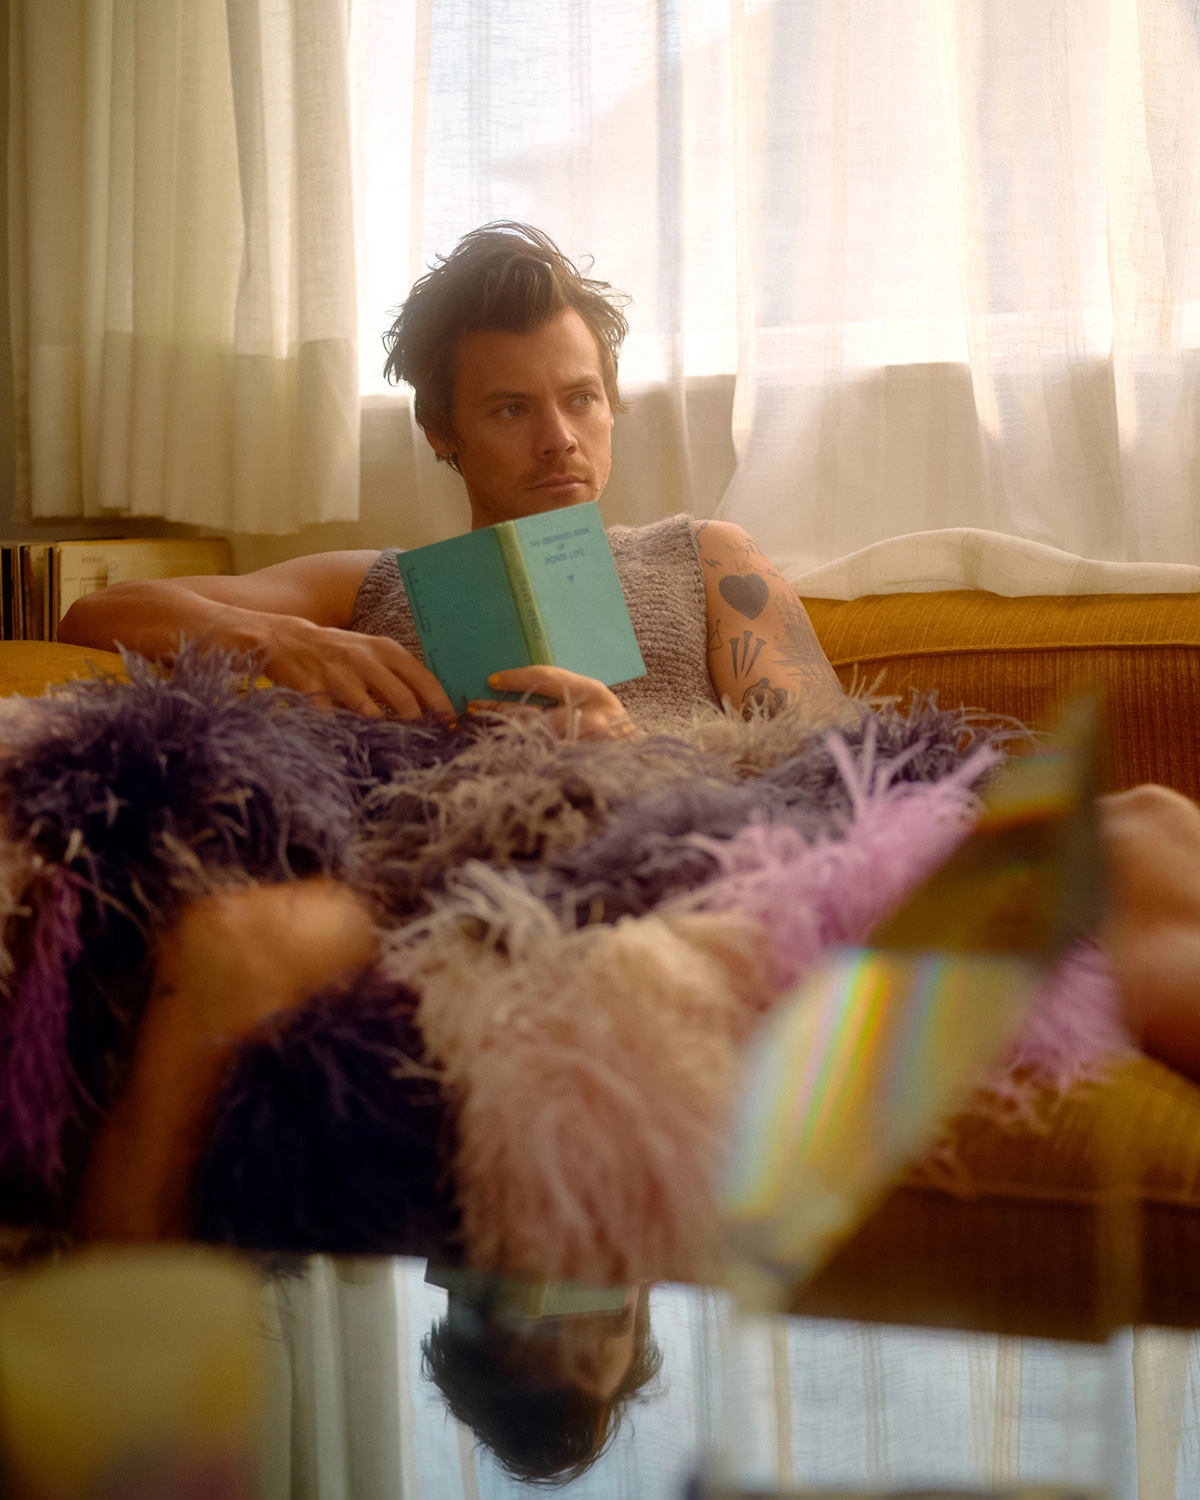 Harry Styles covers Rolling Stone Global September 2022 by Amanda Fordyce